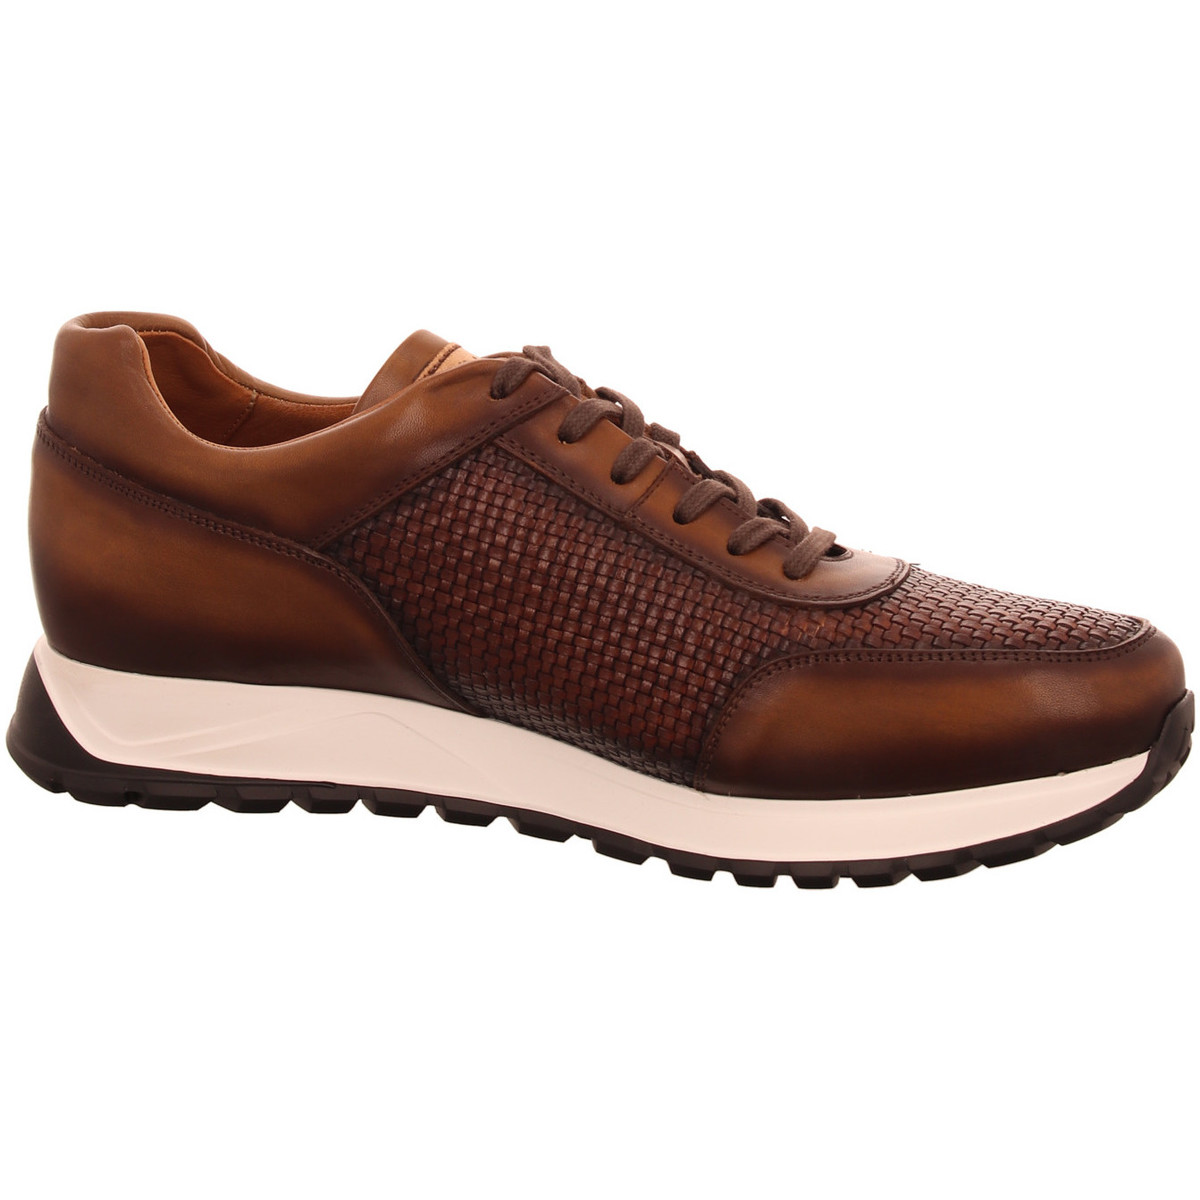 Chaussures Homme Fruit Of The Loo  Marron